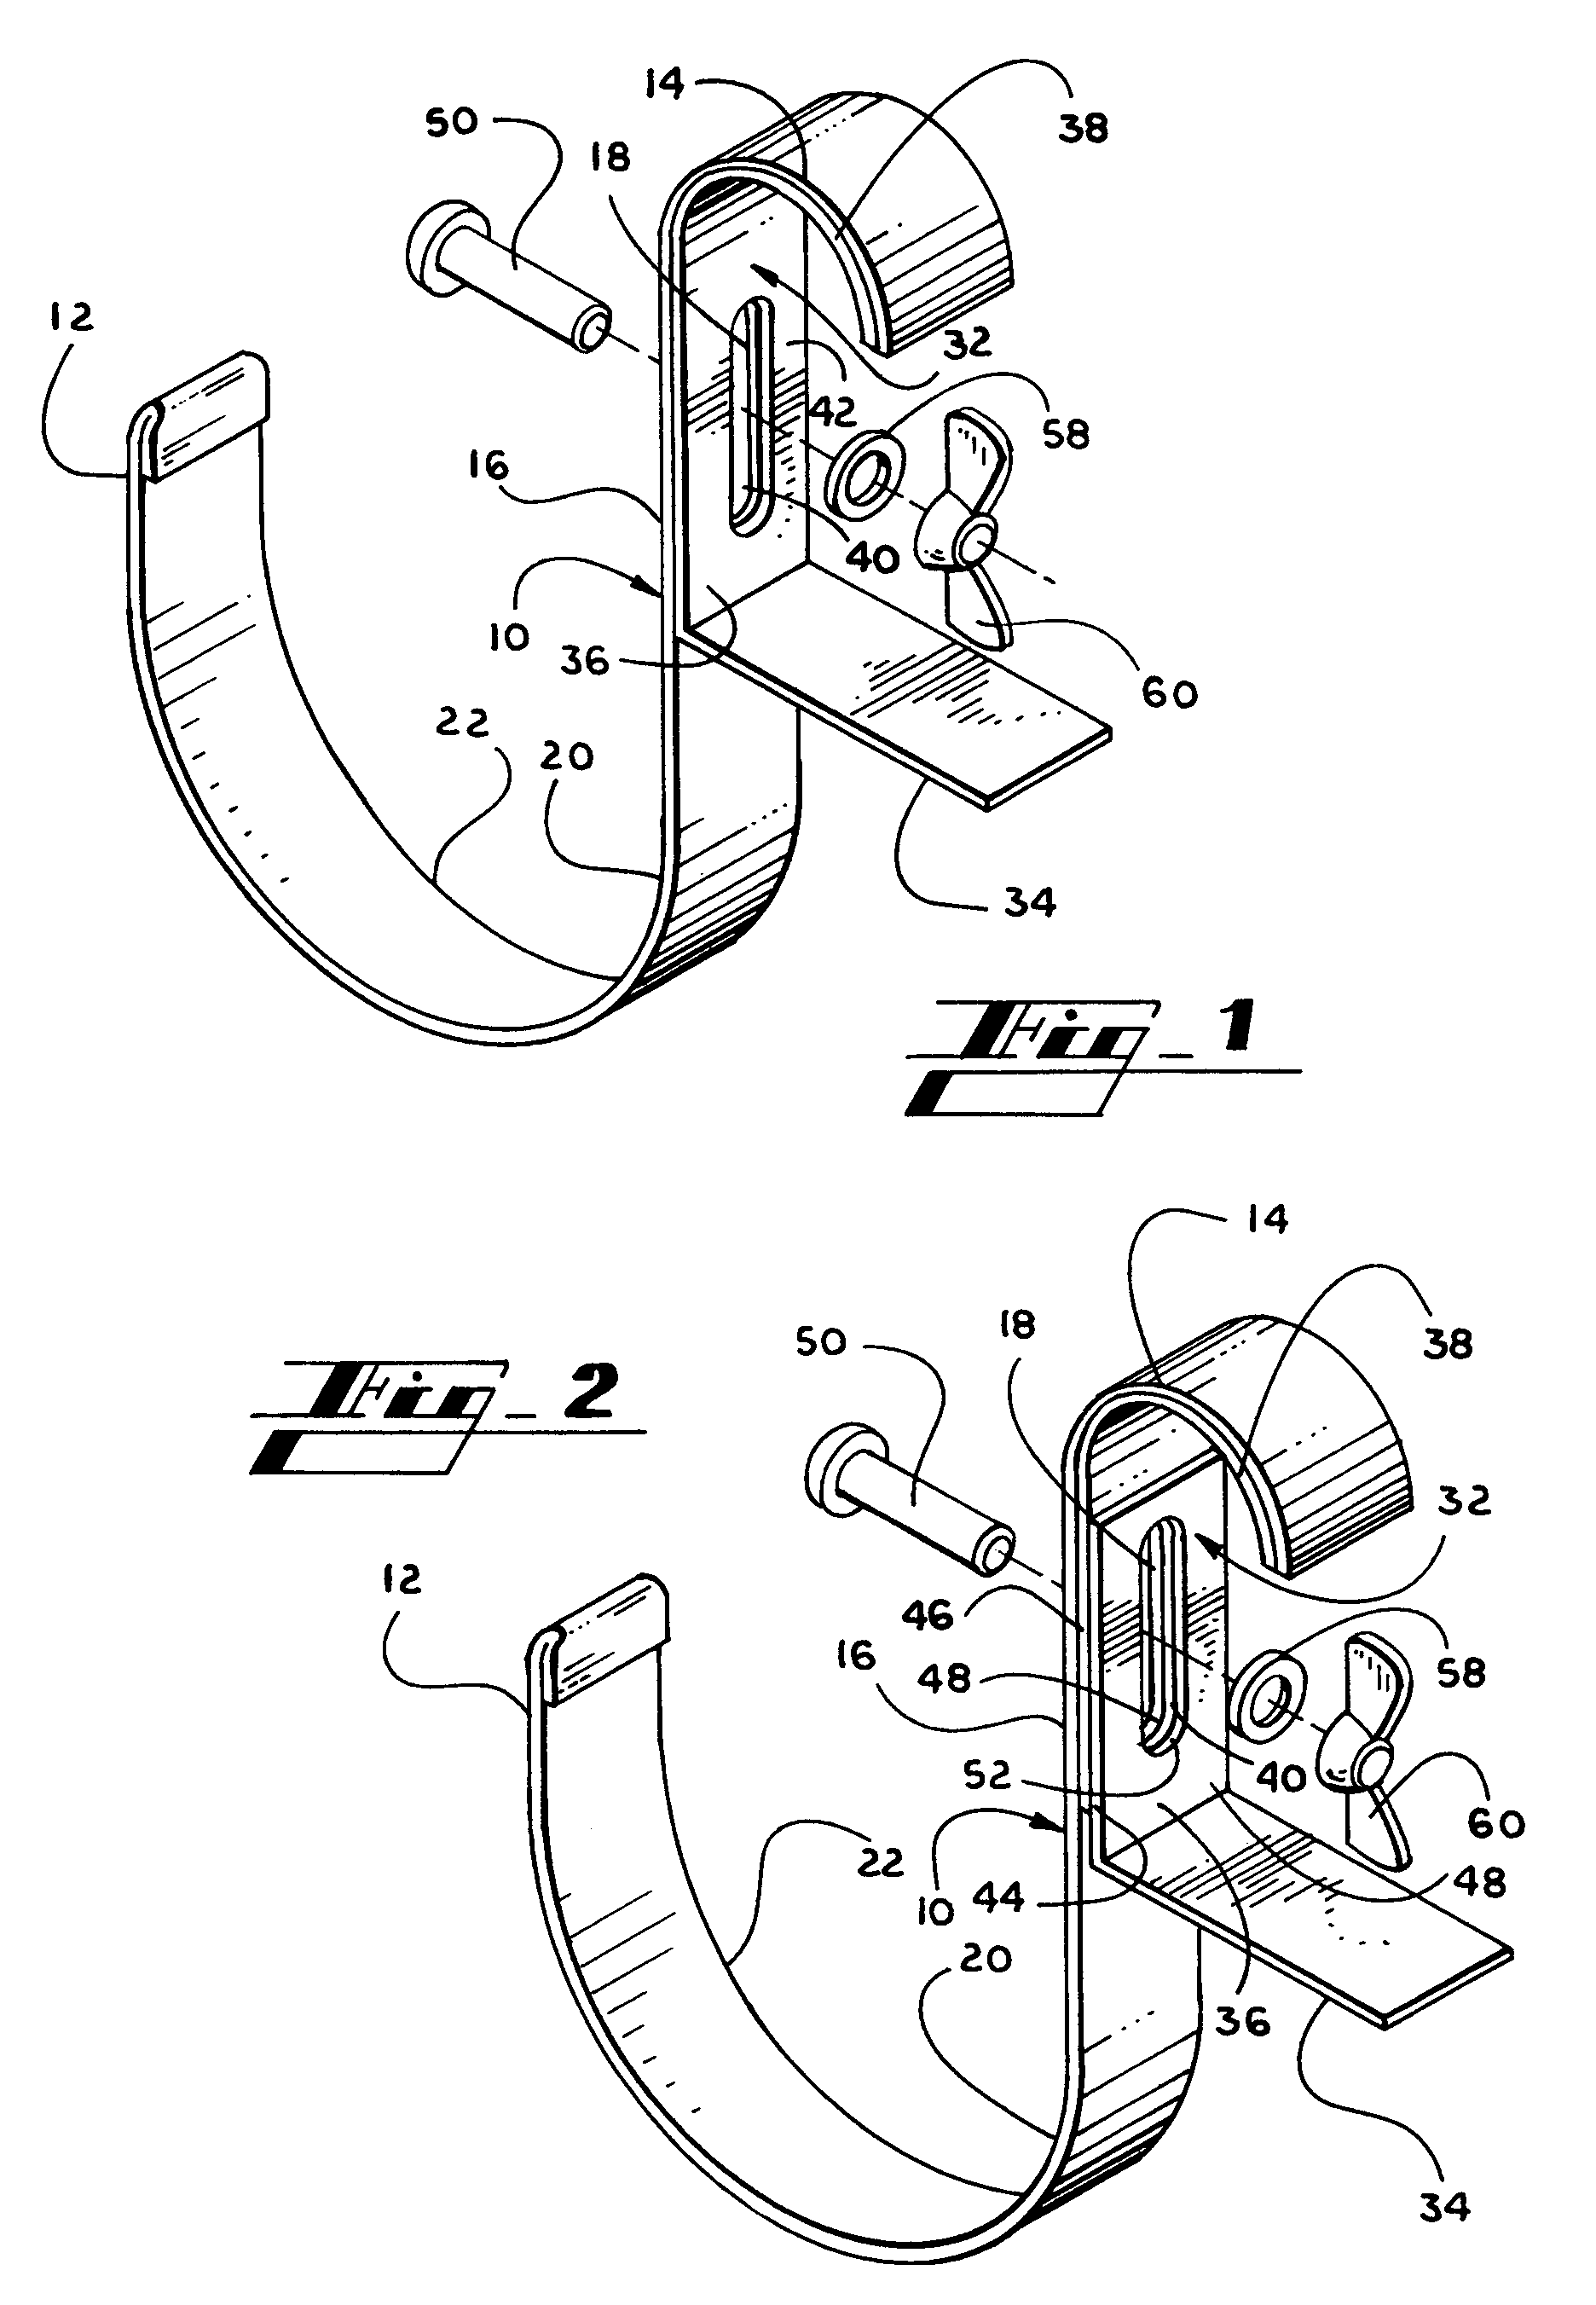 Clamping device for stainless steel sinks